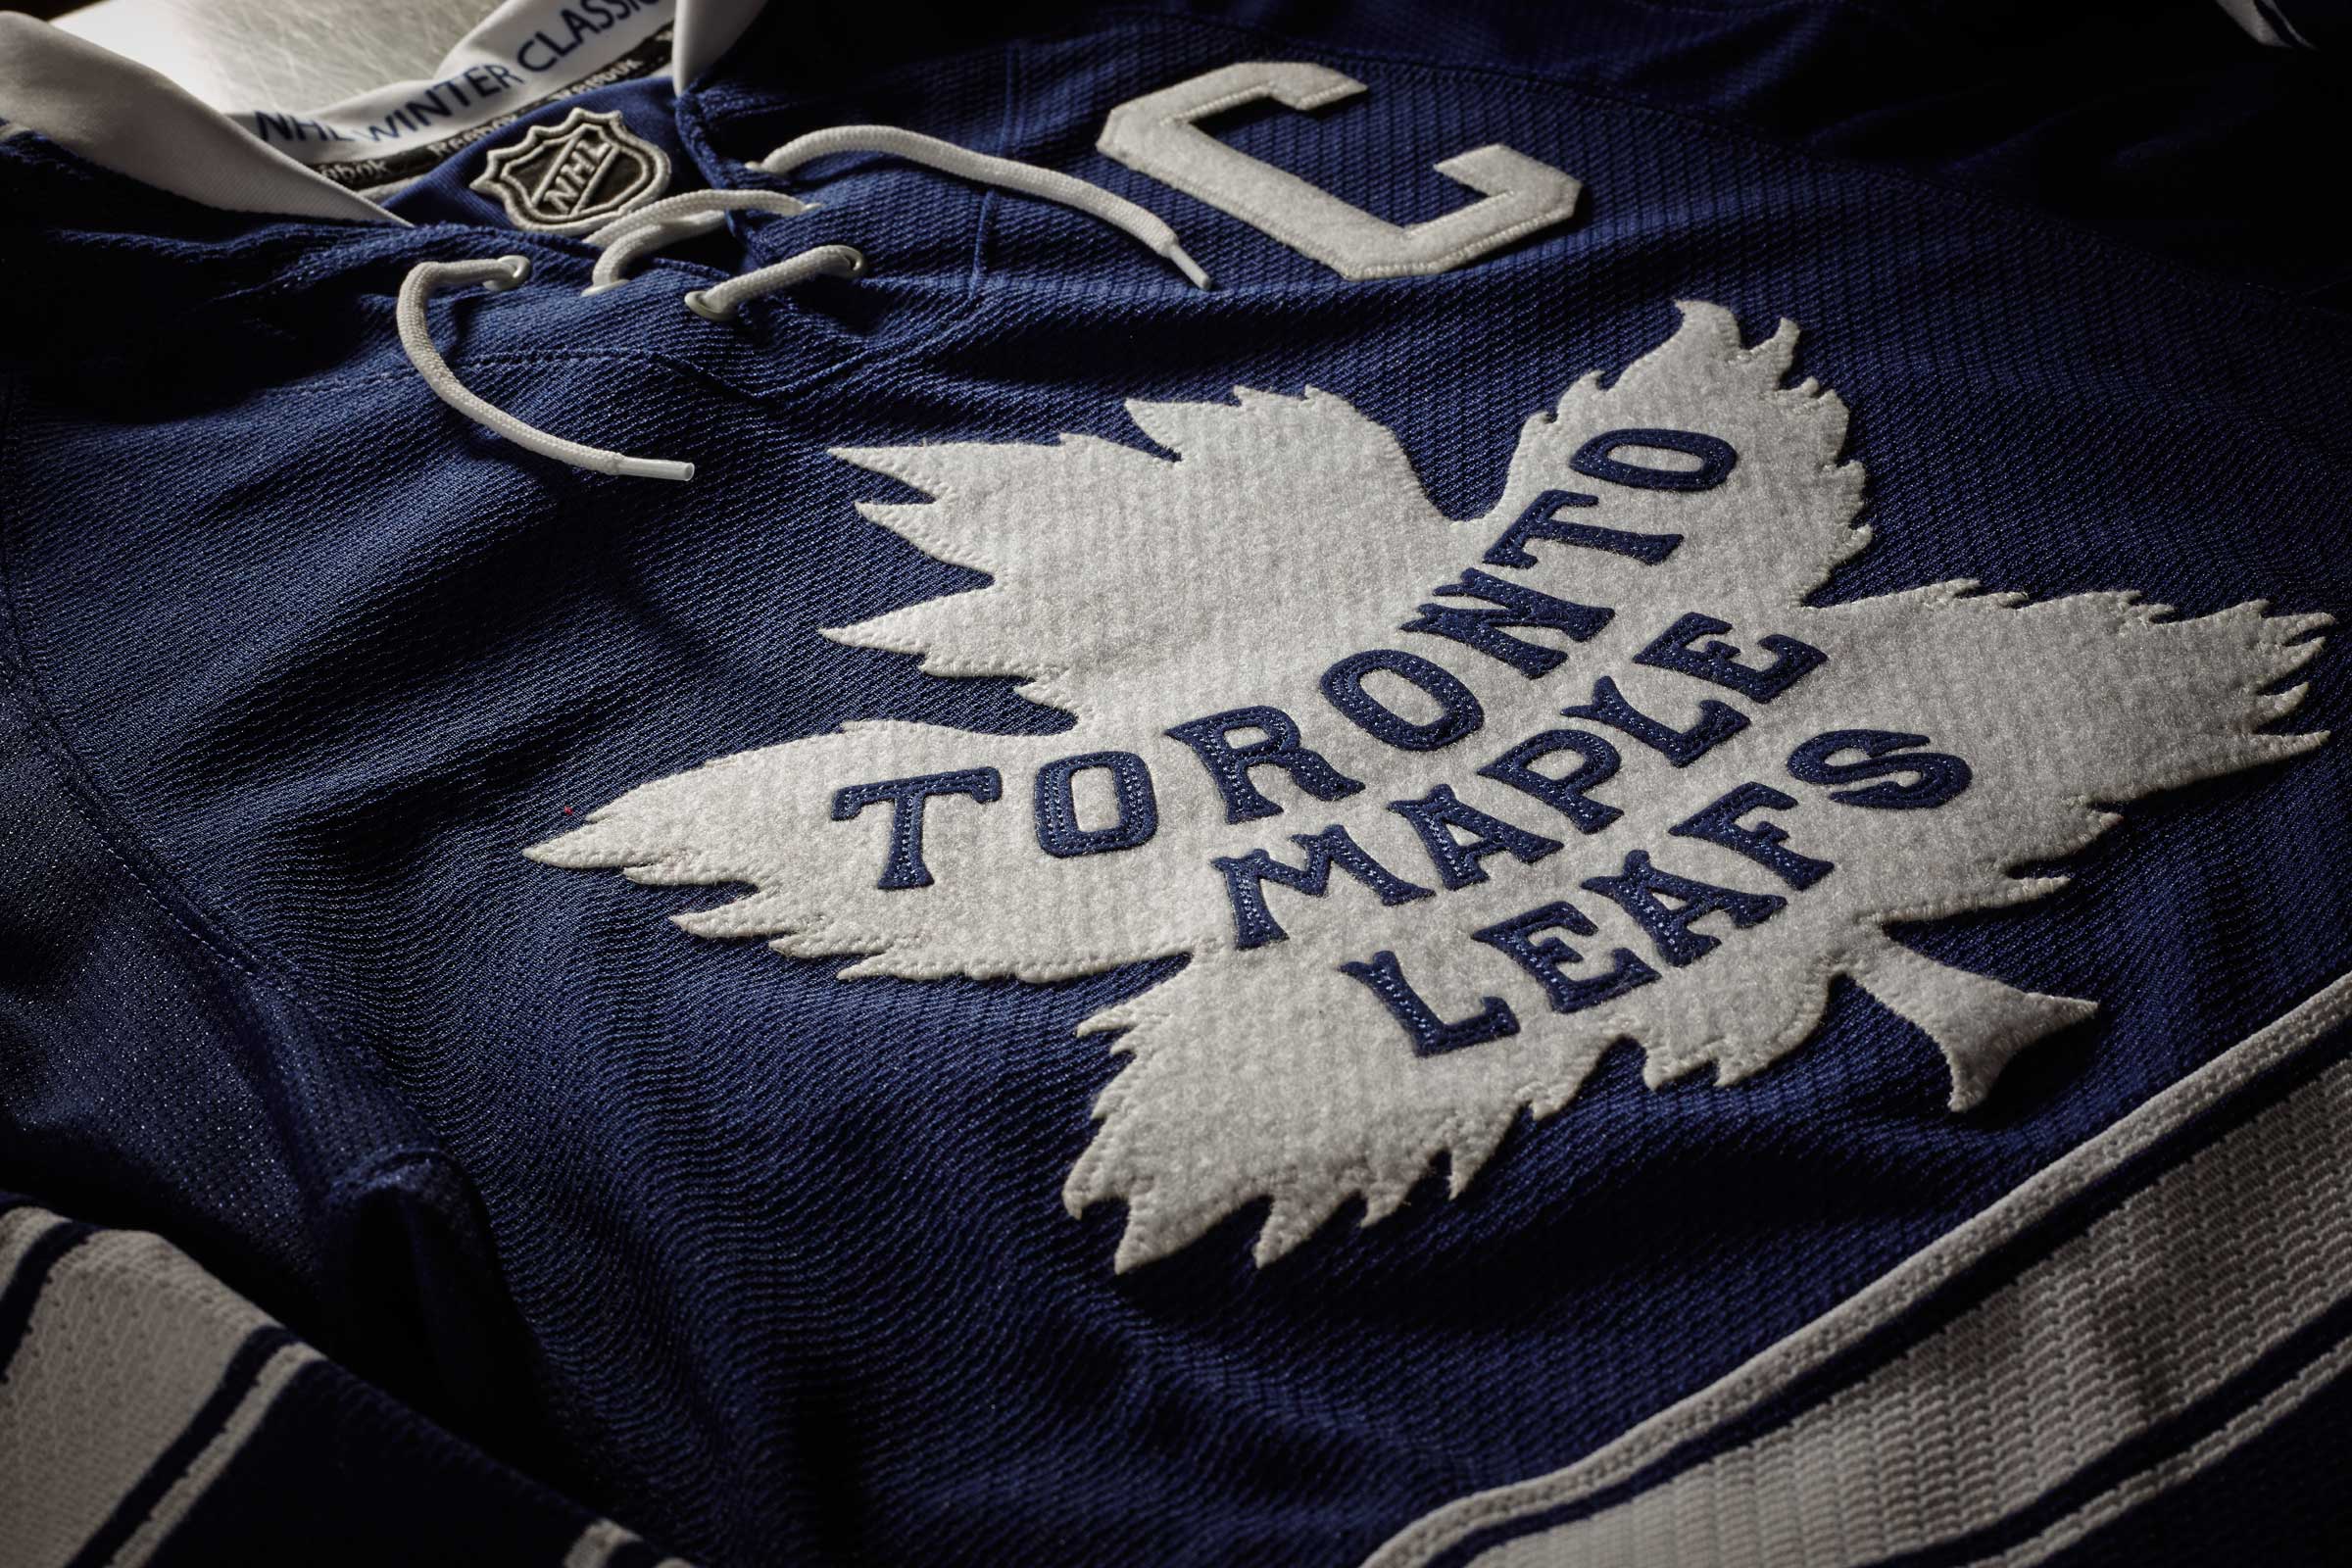 toronto maple leafs wallpaper 2012 - images - tbwnz.com